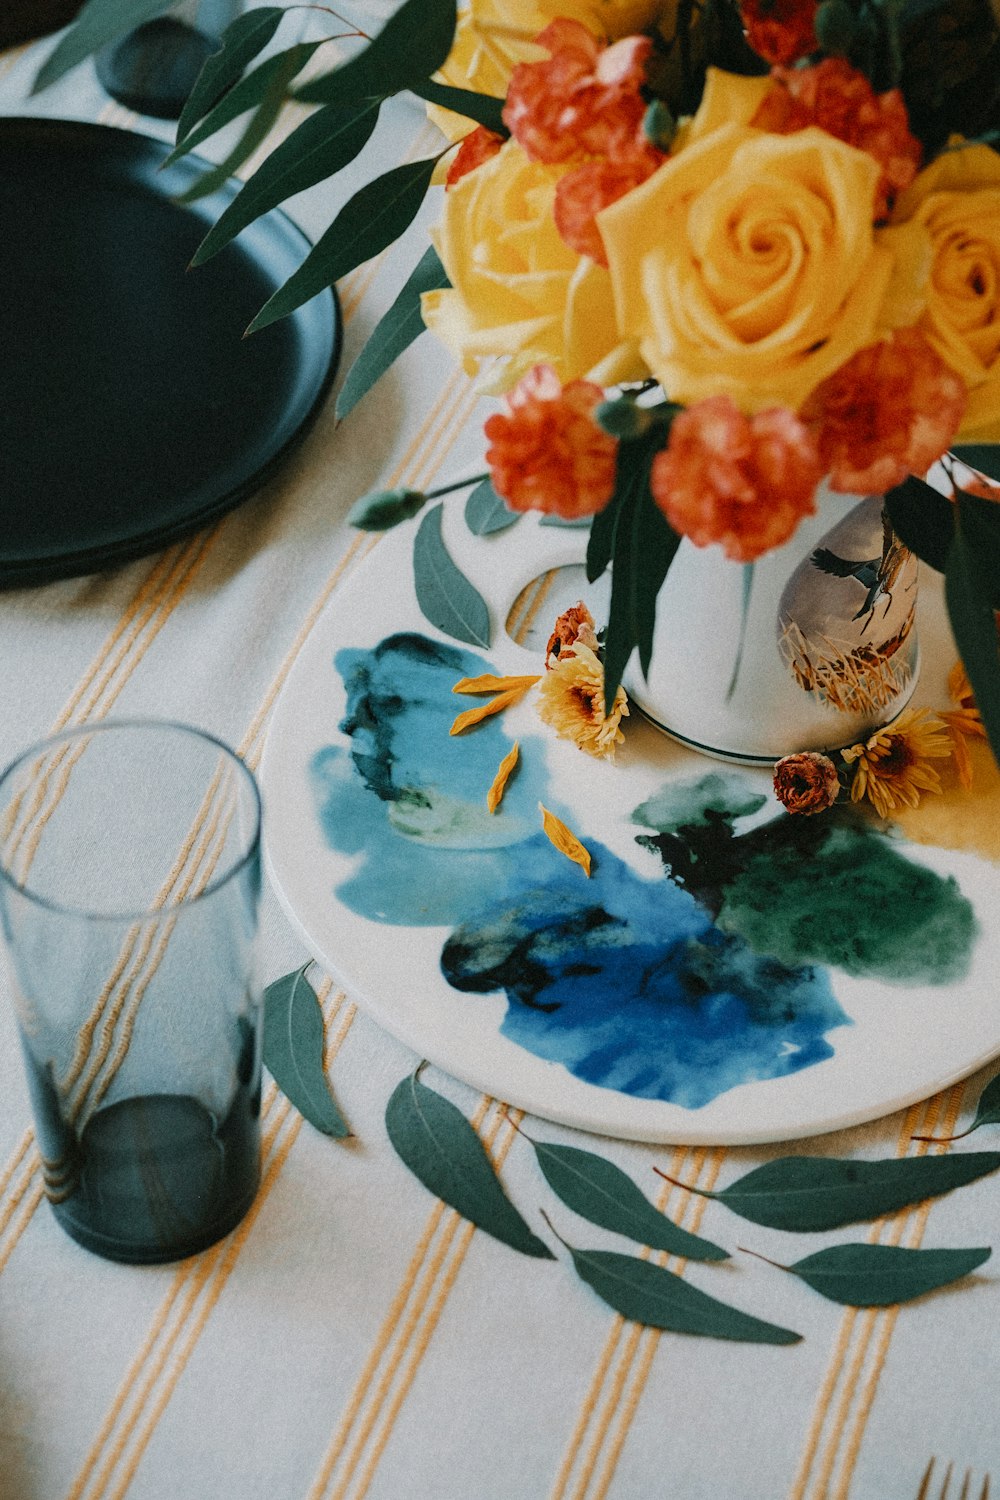 a plate with flowers on it sitting on a table